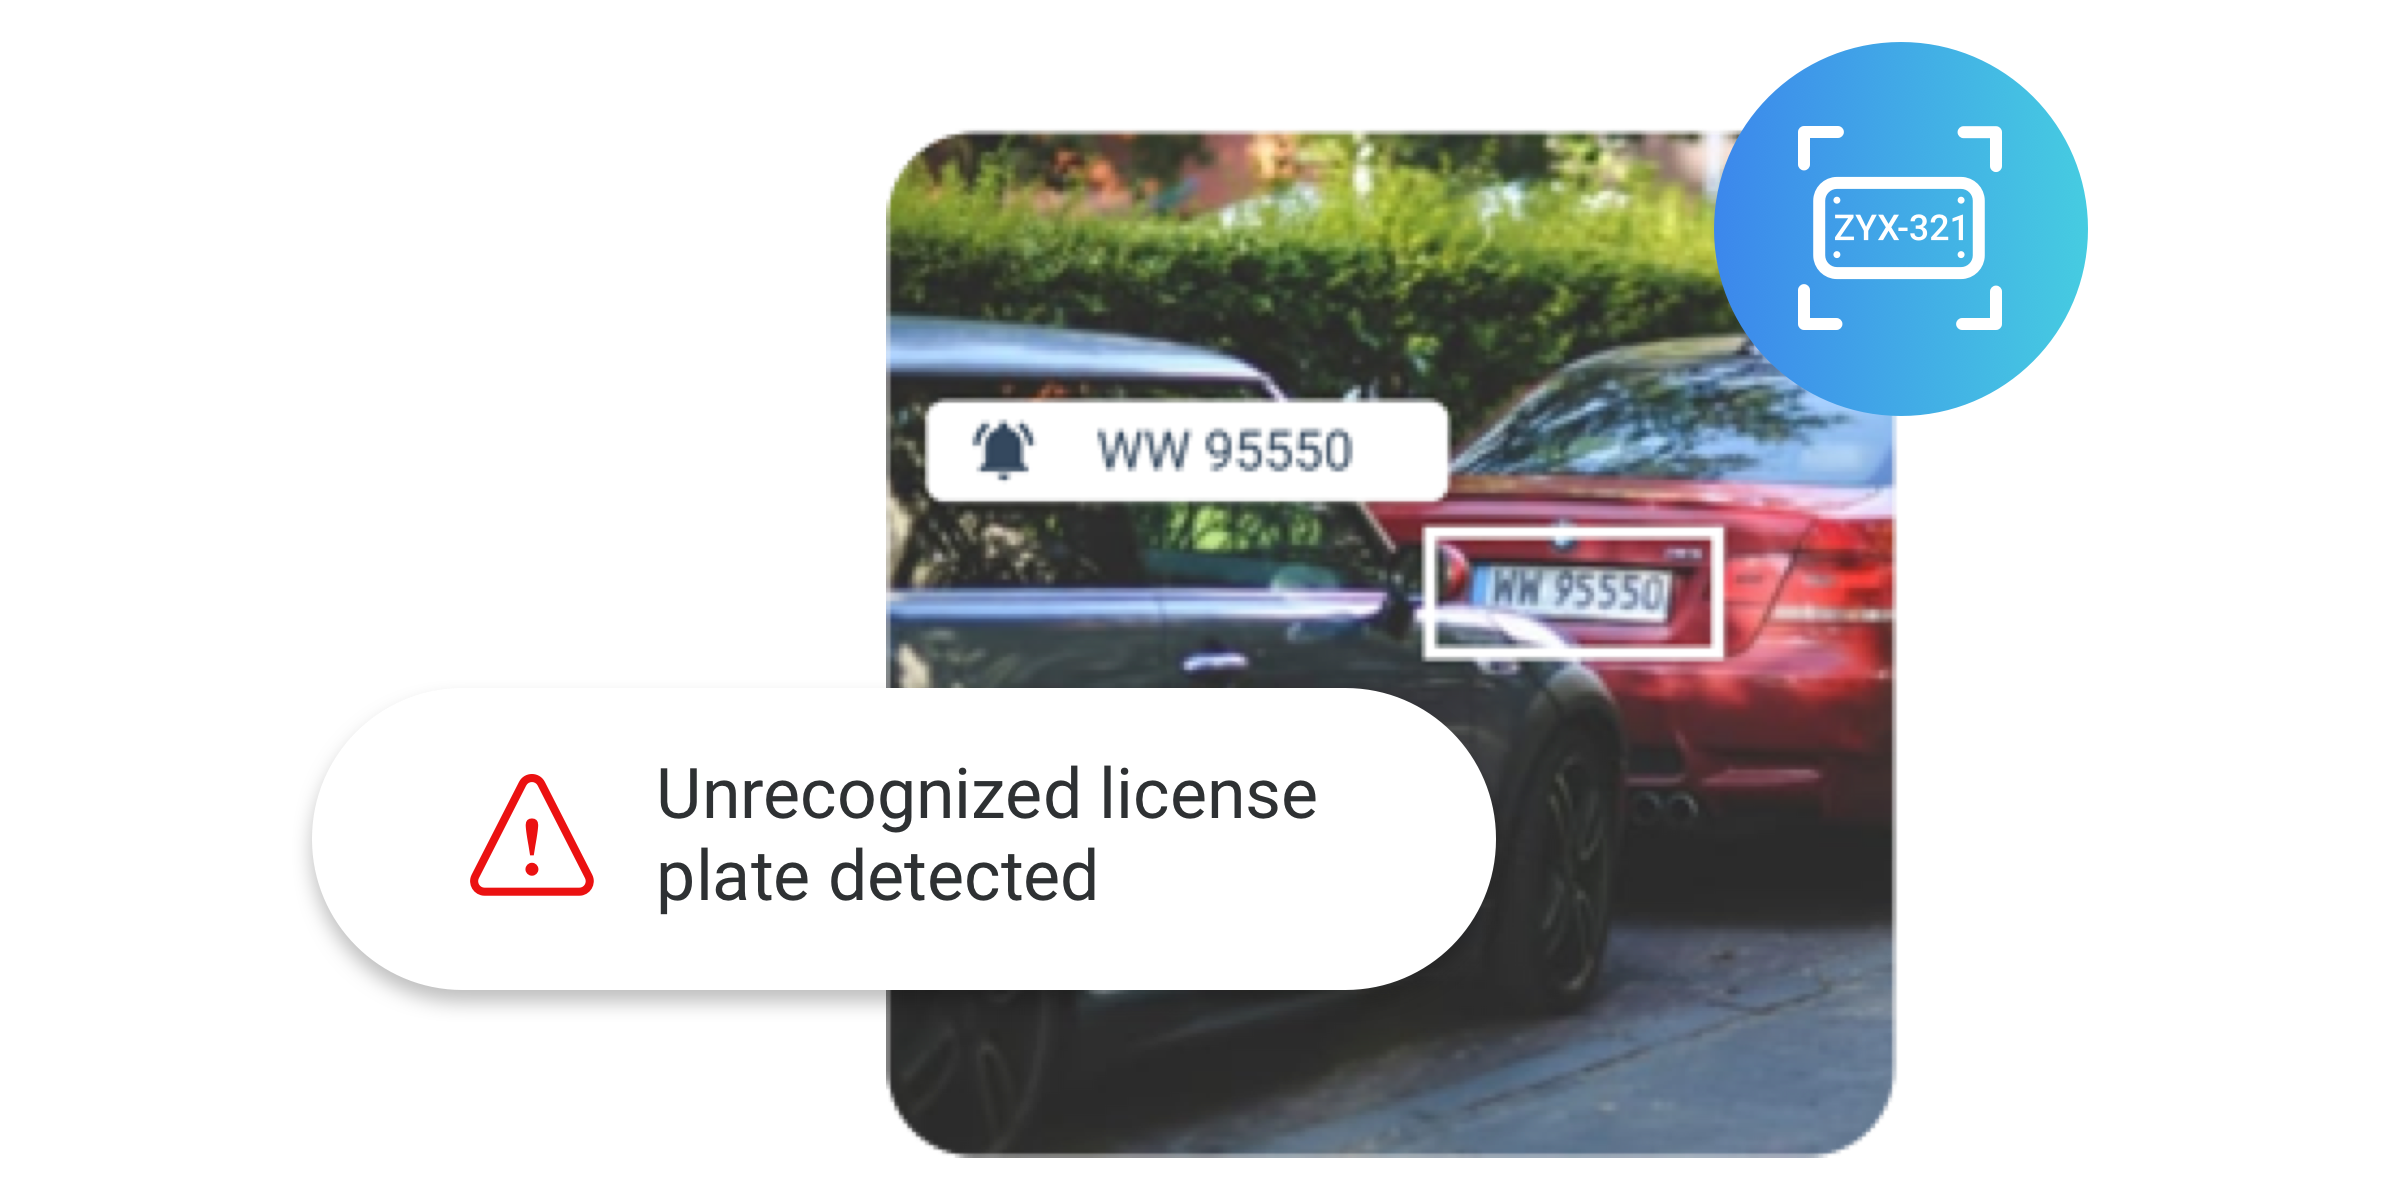 rhombus ai video analytics license plate recognition vehicle school physical security platform vms